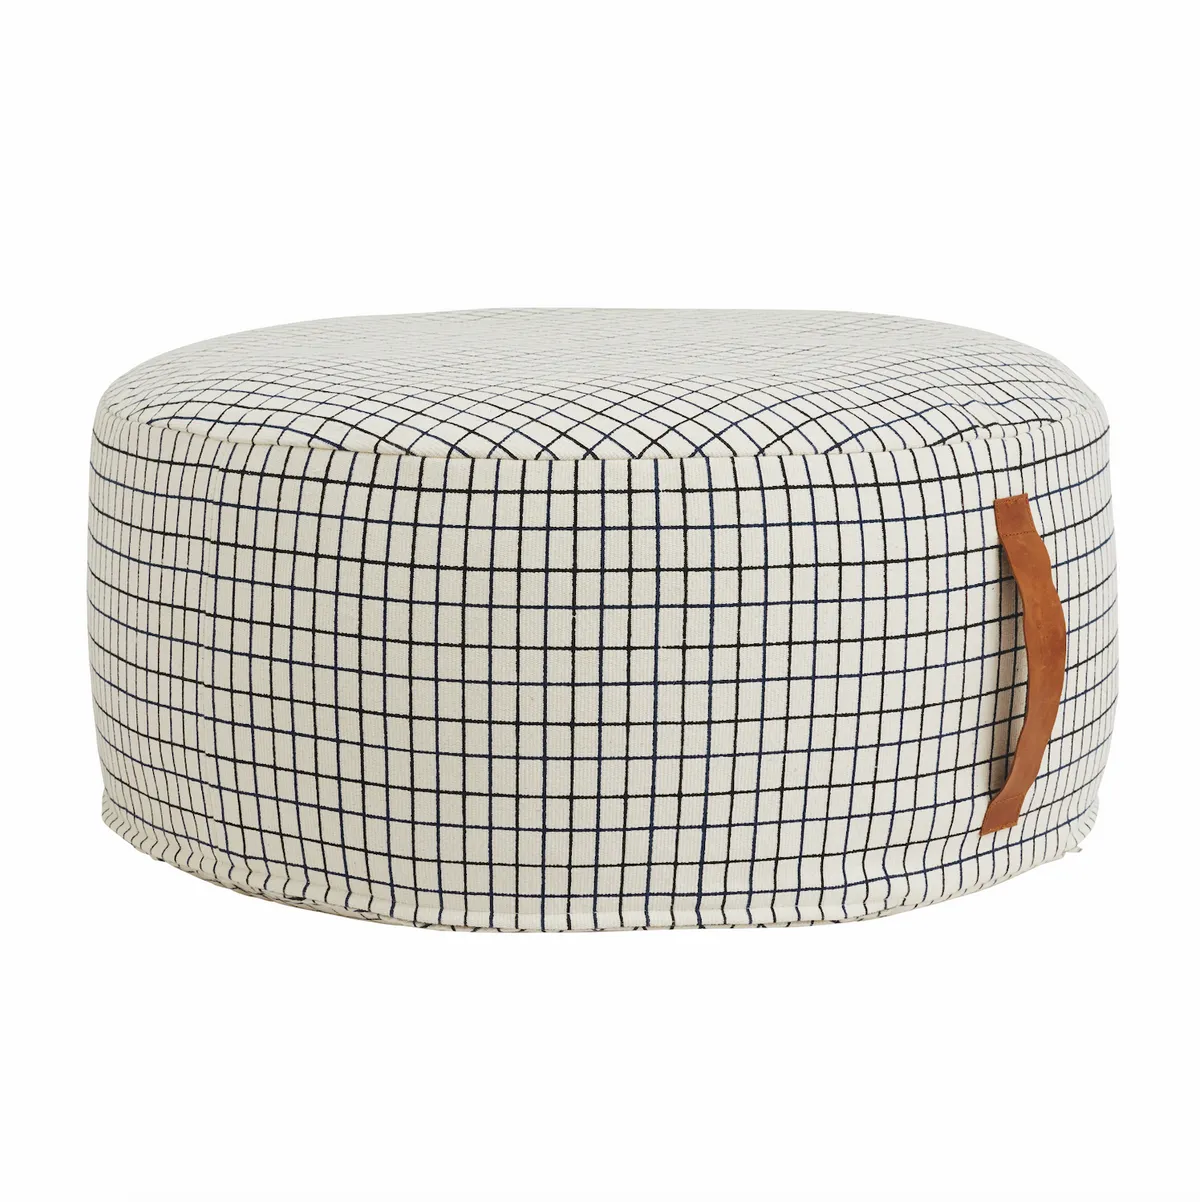 This grid-print Sit on Me Pouf will add useful extra seating and cool Scandi style. £149 from Someday Designs